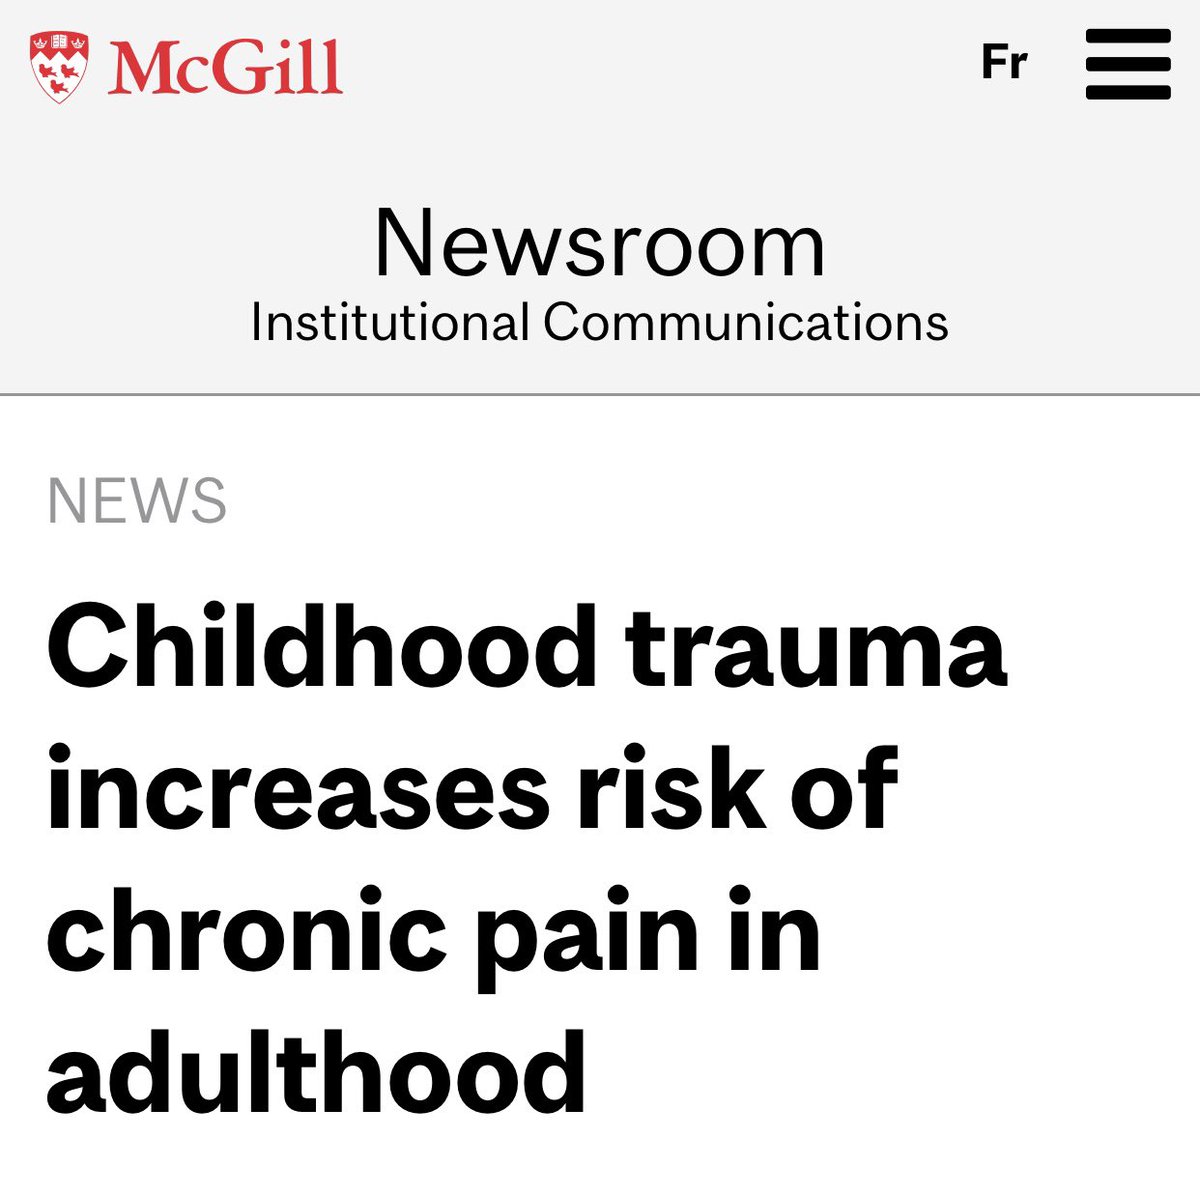 I wish I could see this kind of research as a step forward. Unfortunately, the current environment of open animus & hostility toward #ChronicPain patients, means this research could be used to further stigmatize people w/ pain. #ChronicPain isn’t mental illness.